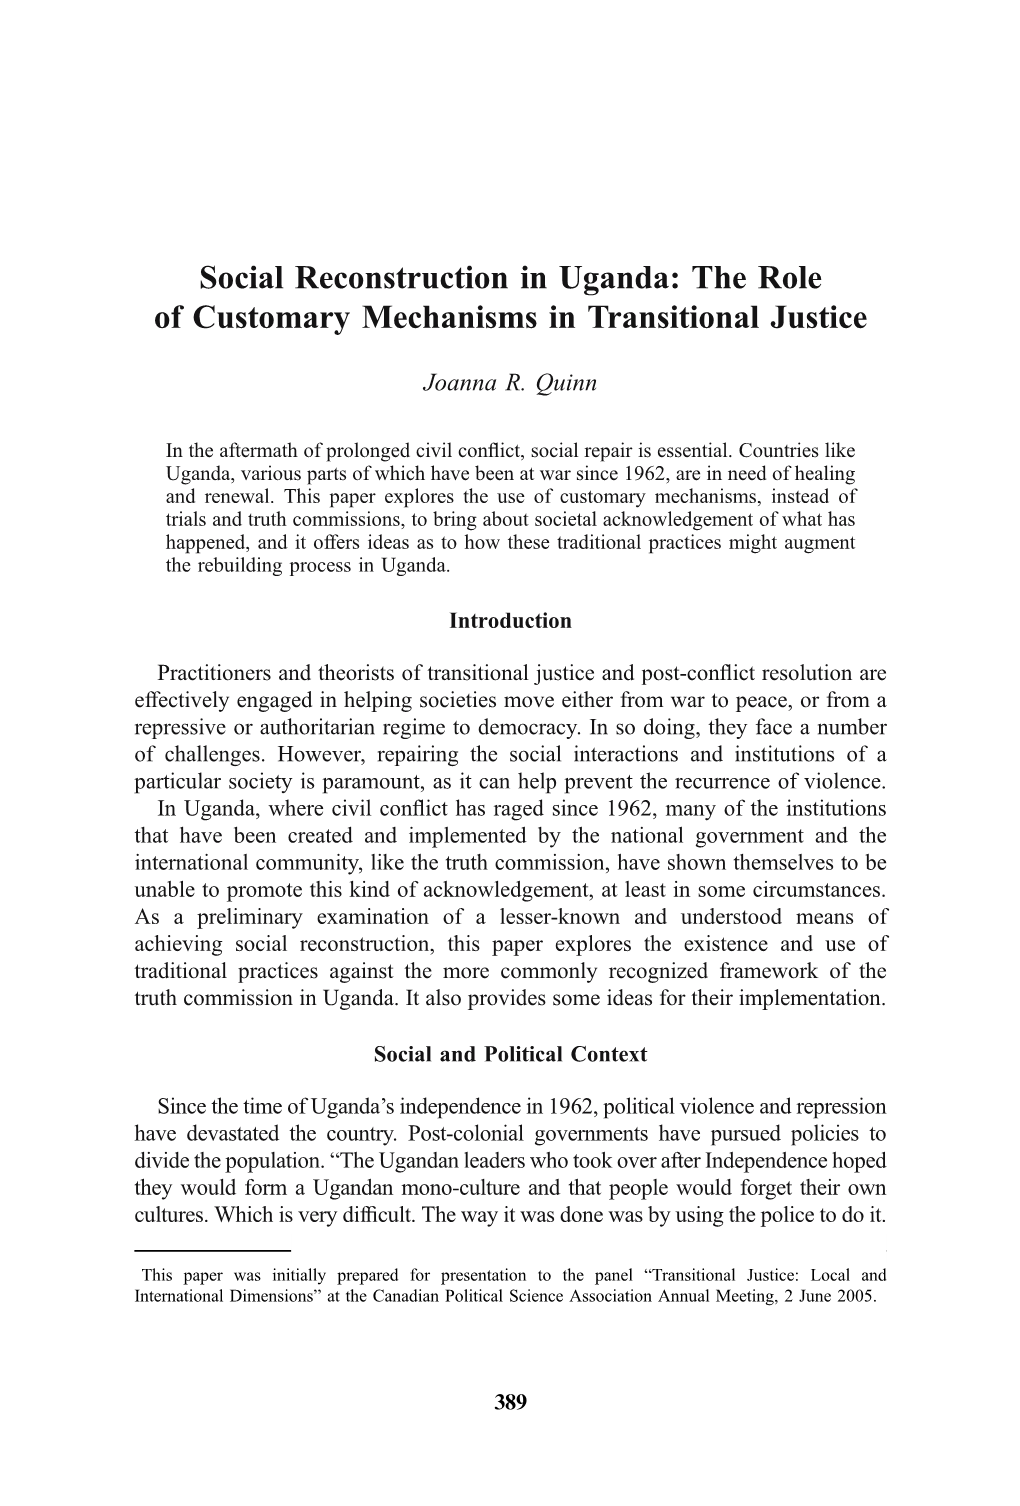 Social Reconstruction in Uganda: the Role of Customary Mechanisms in Transitional Justice